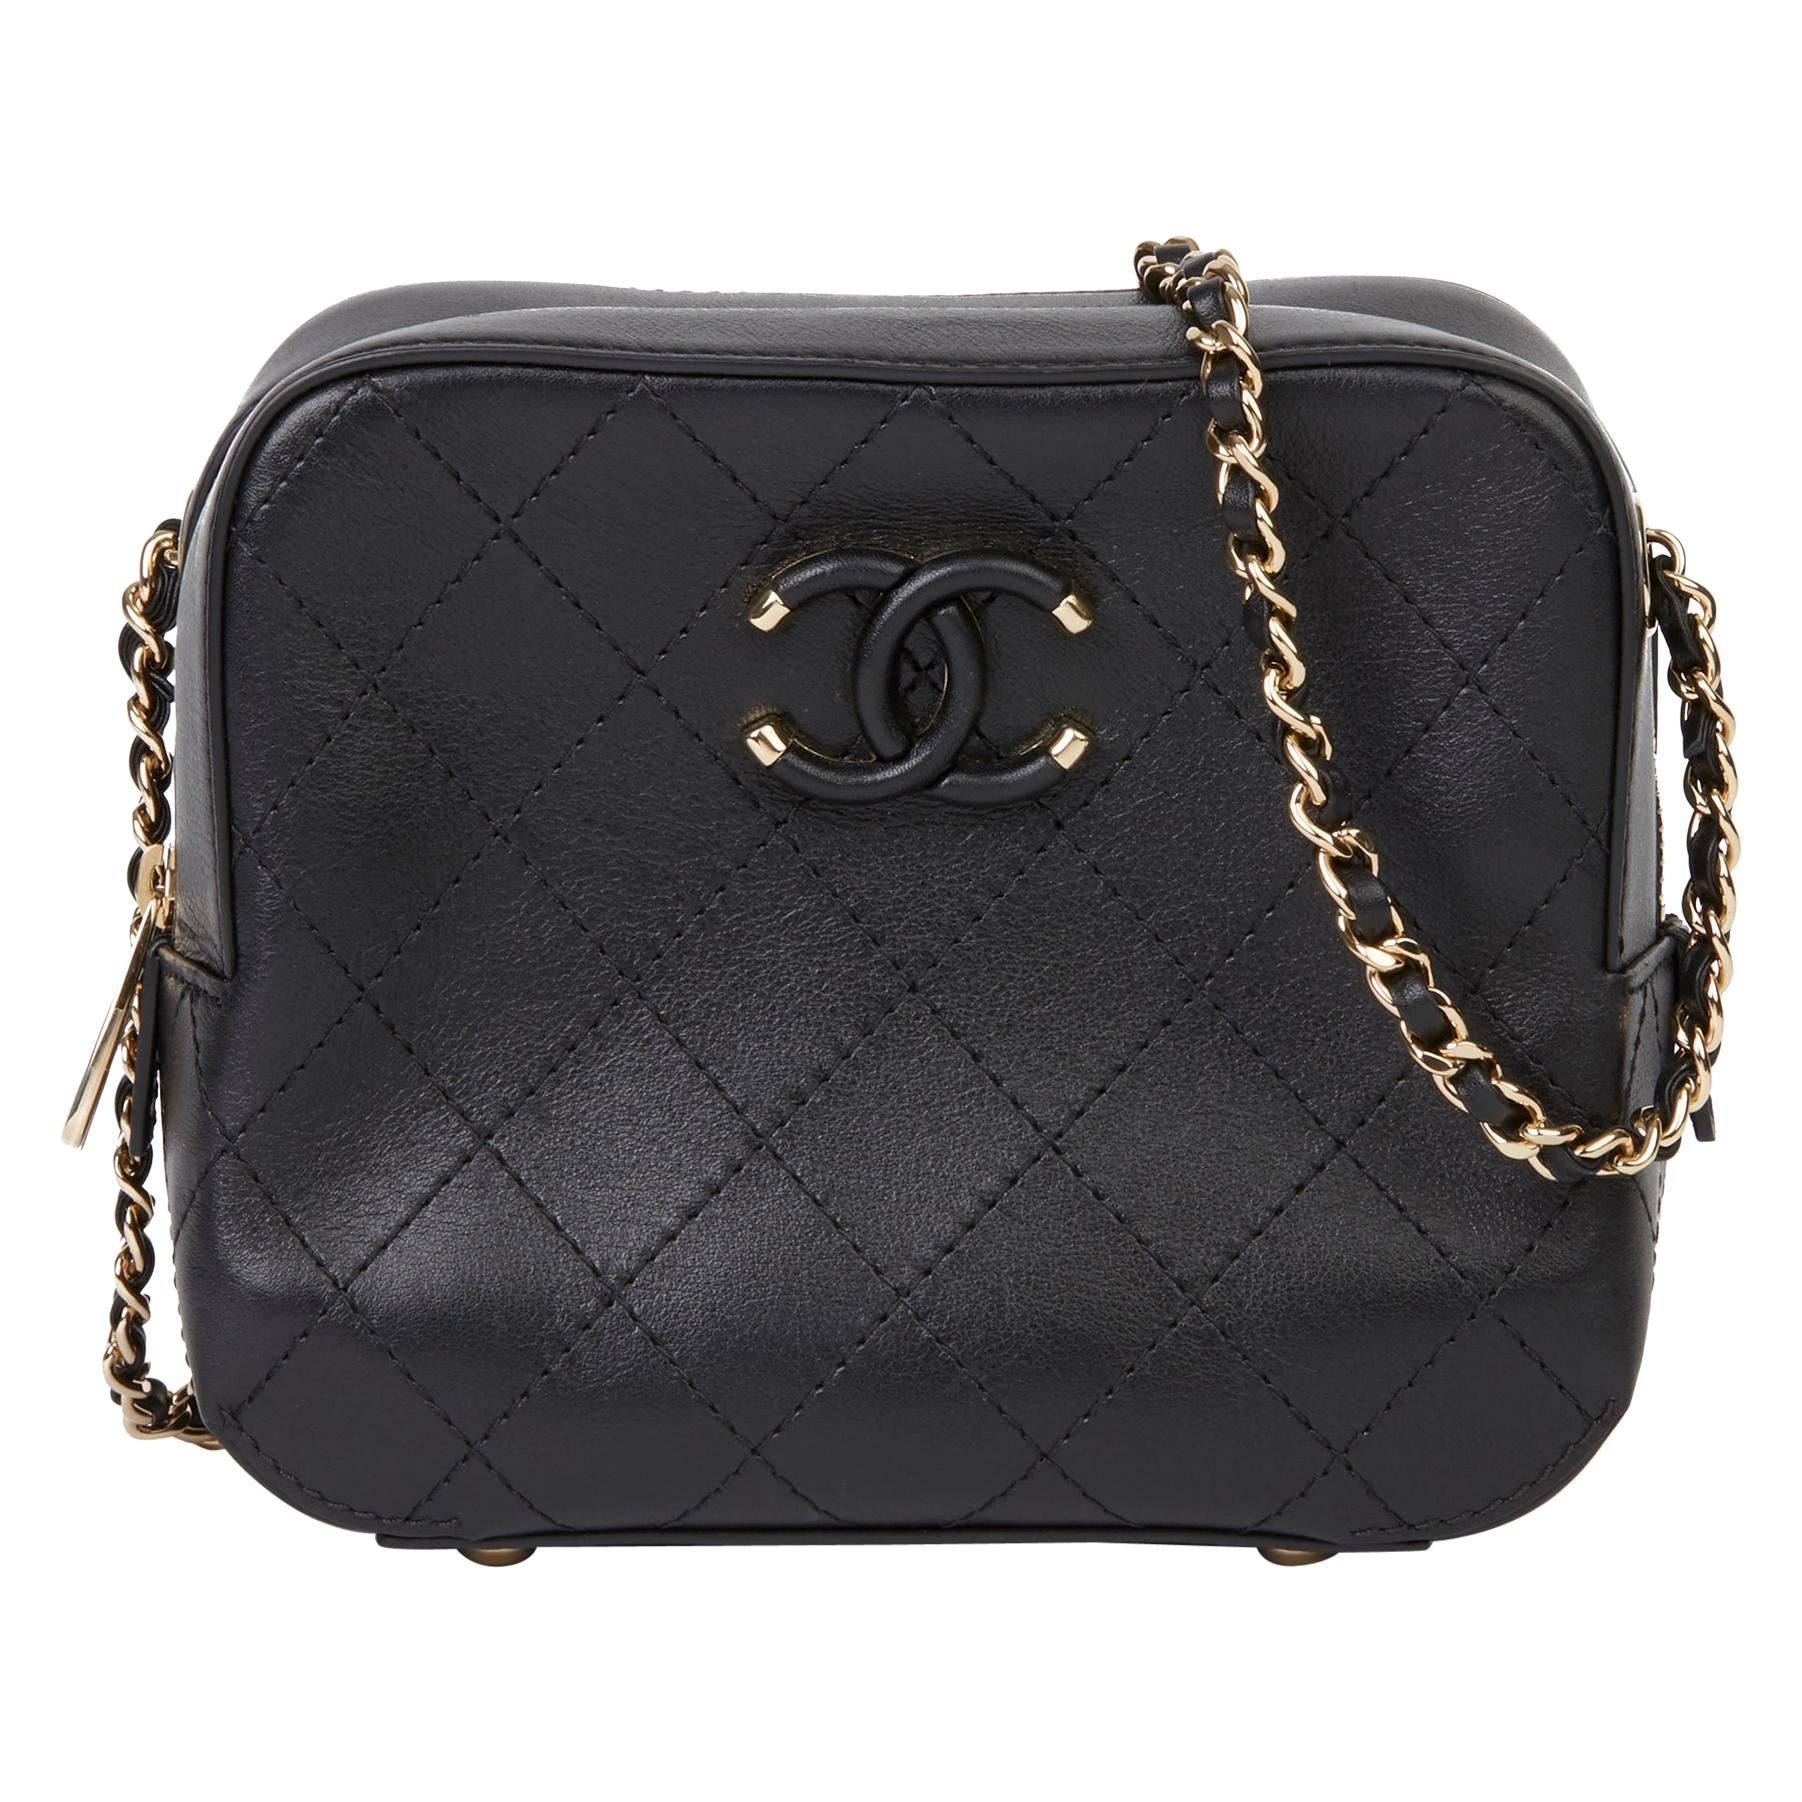 2019 Chanel Quilted Calfskin Mini Classic Camera Bag 